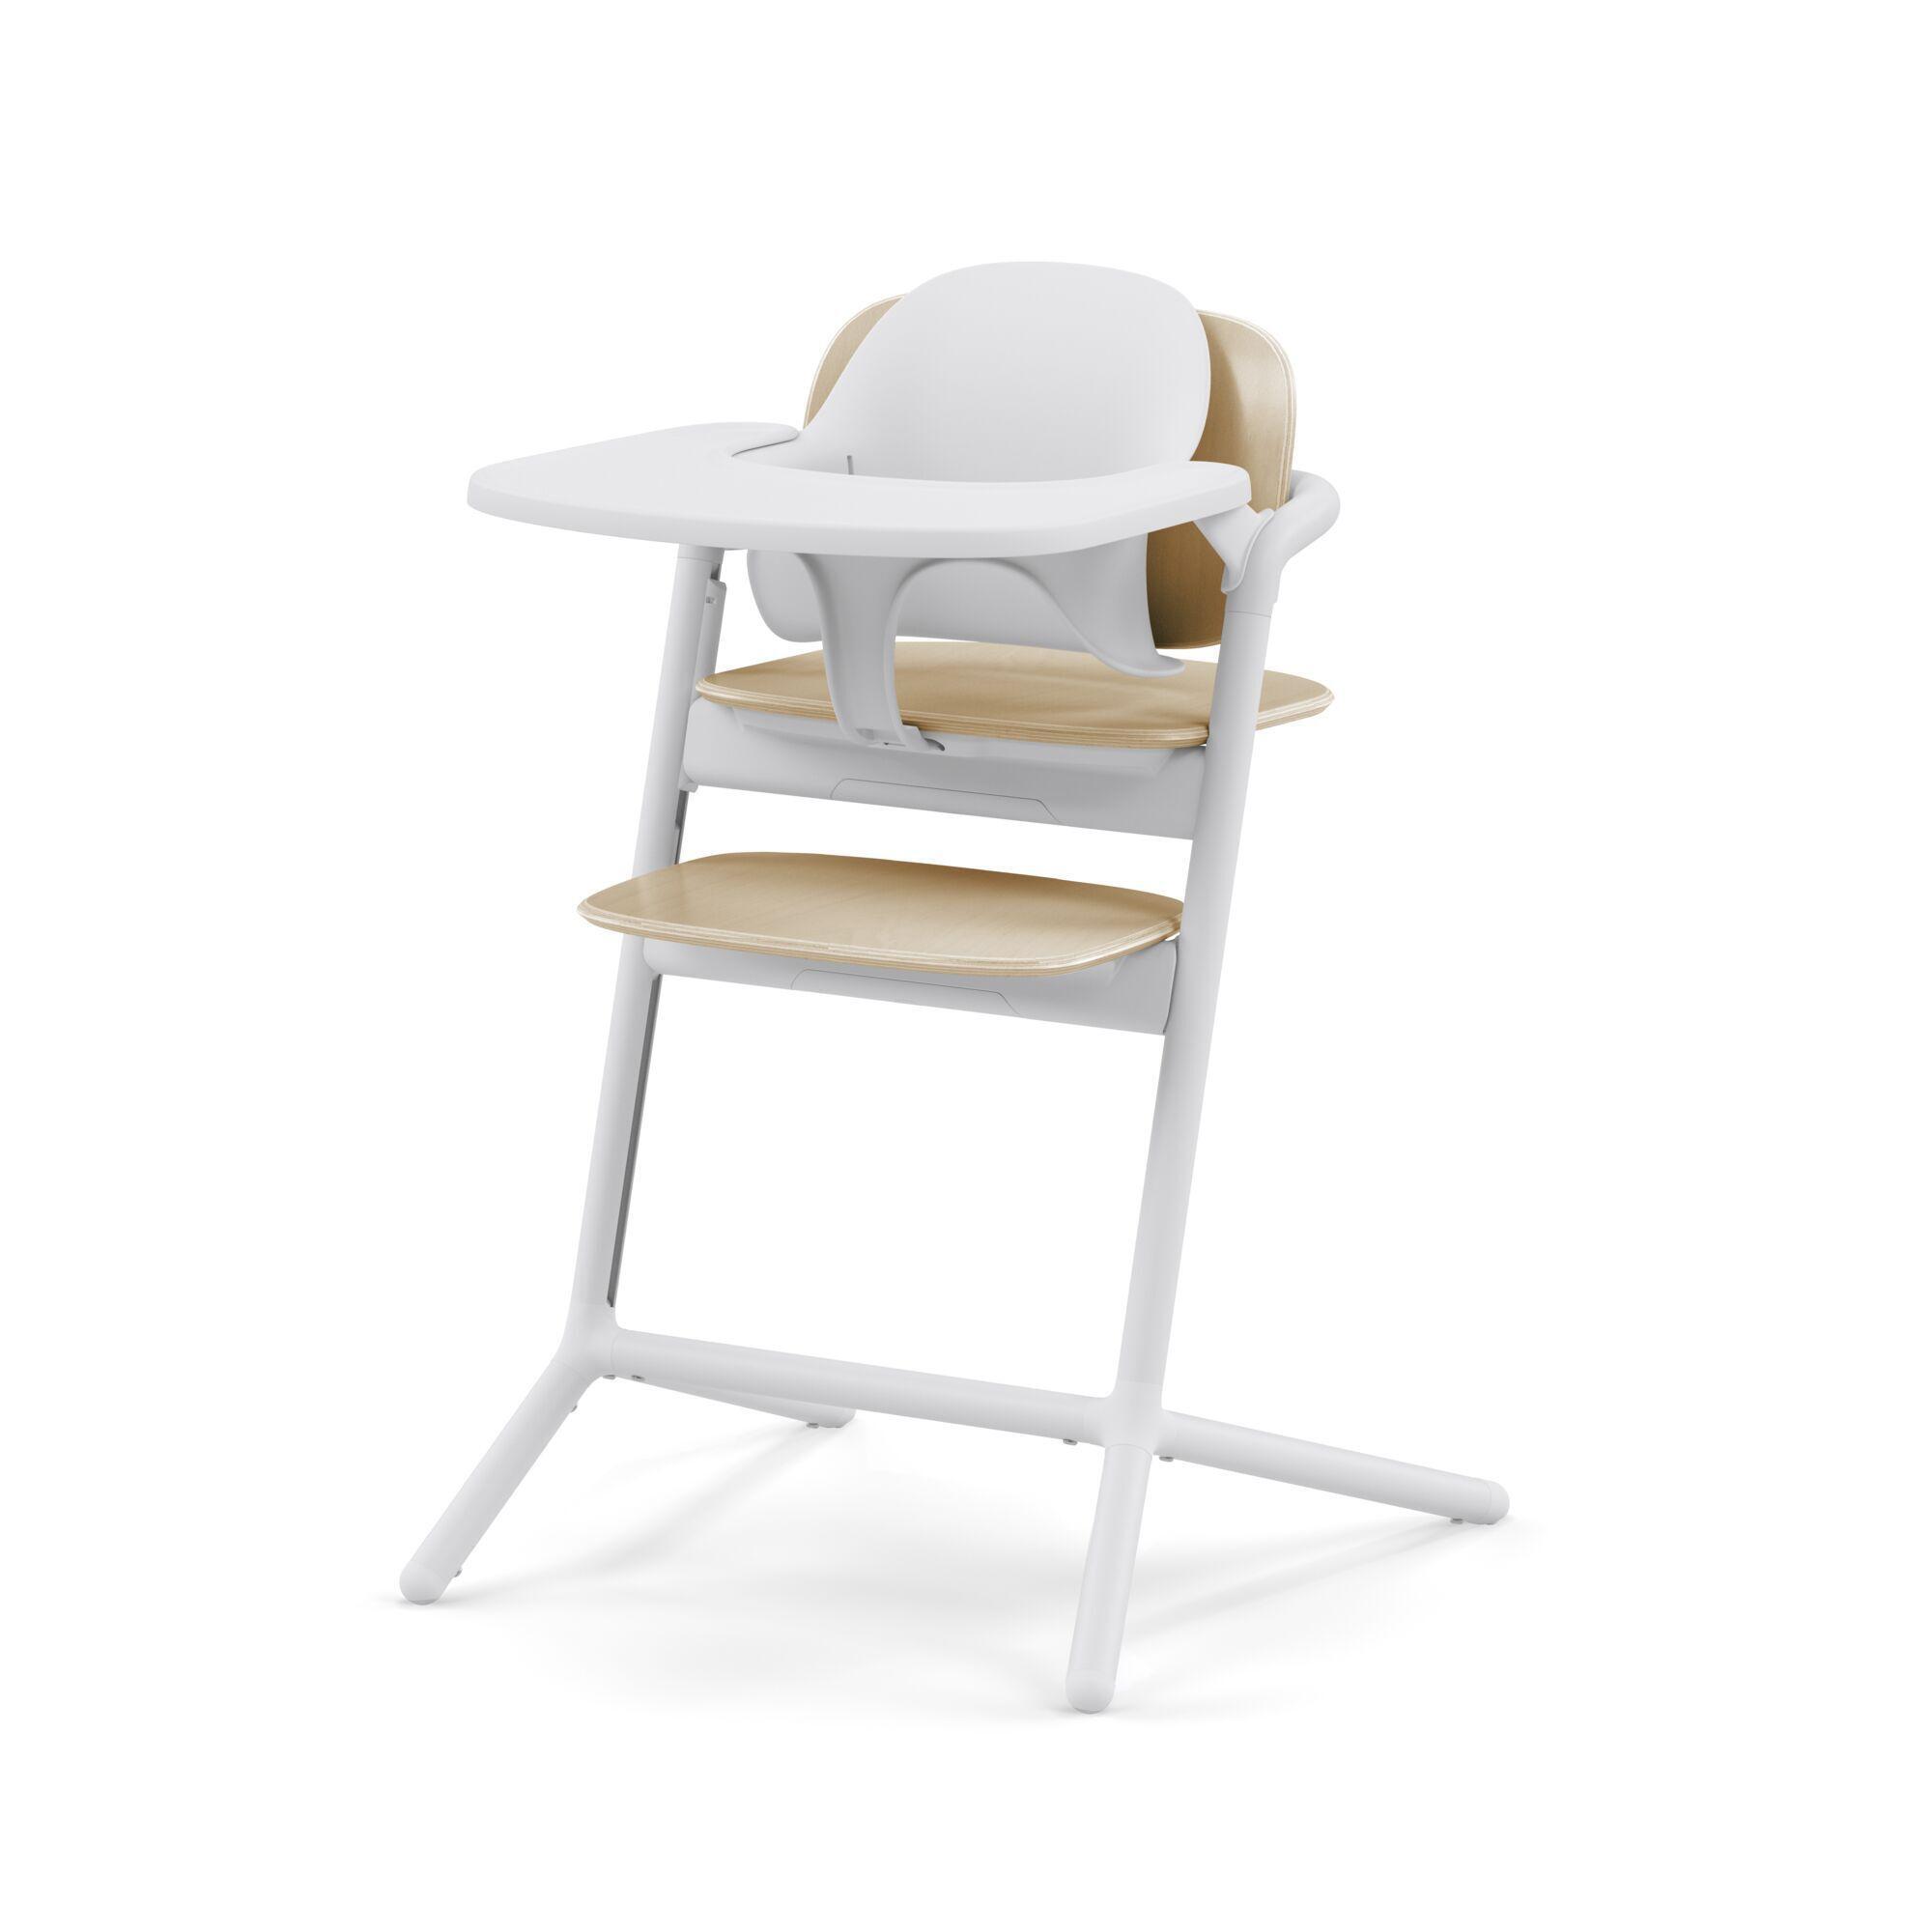 https://www.nordbaby.com/products/images/g120000/127357/eating-chairs-cybex-sand-white-cybex-lemo-3in1-highchair-set-sand-white-127357-64493.jpg